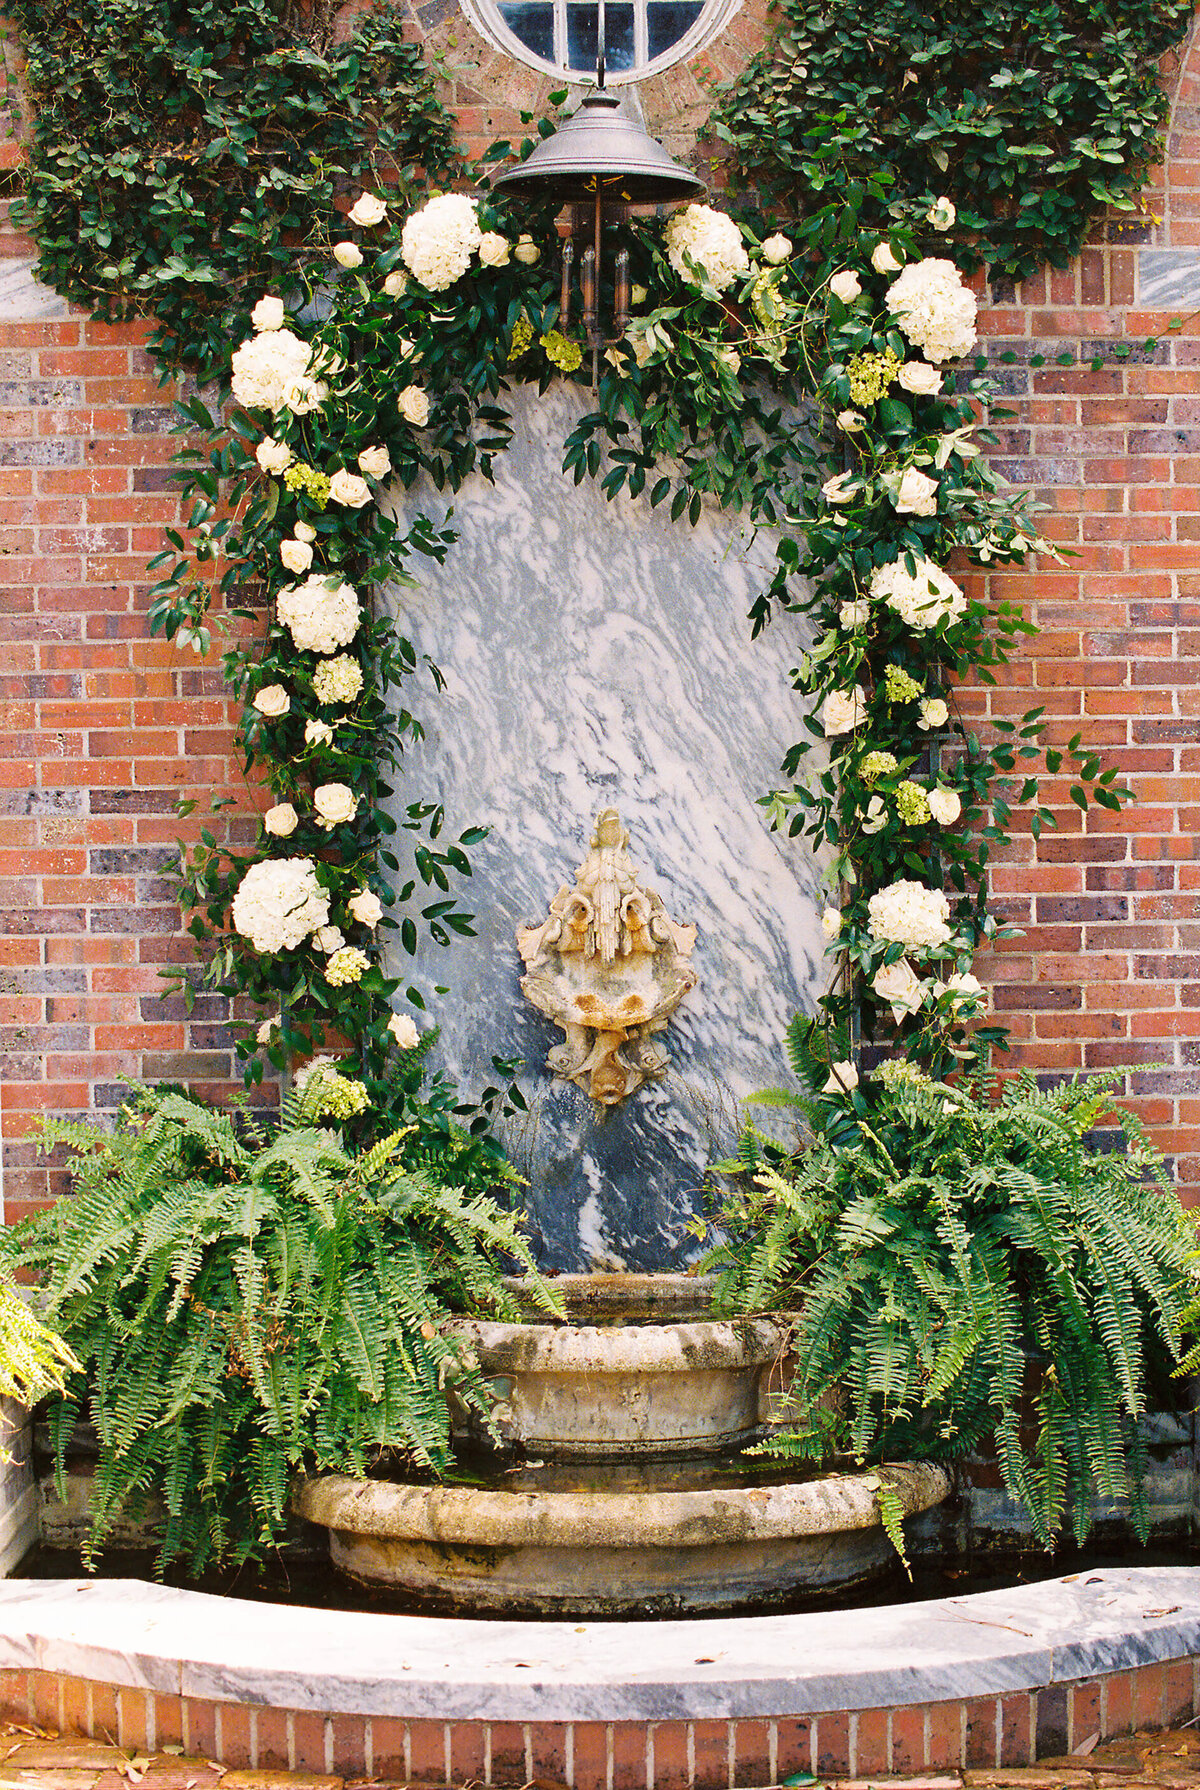 Outdoor fountain decorated with floral installations